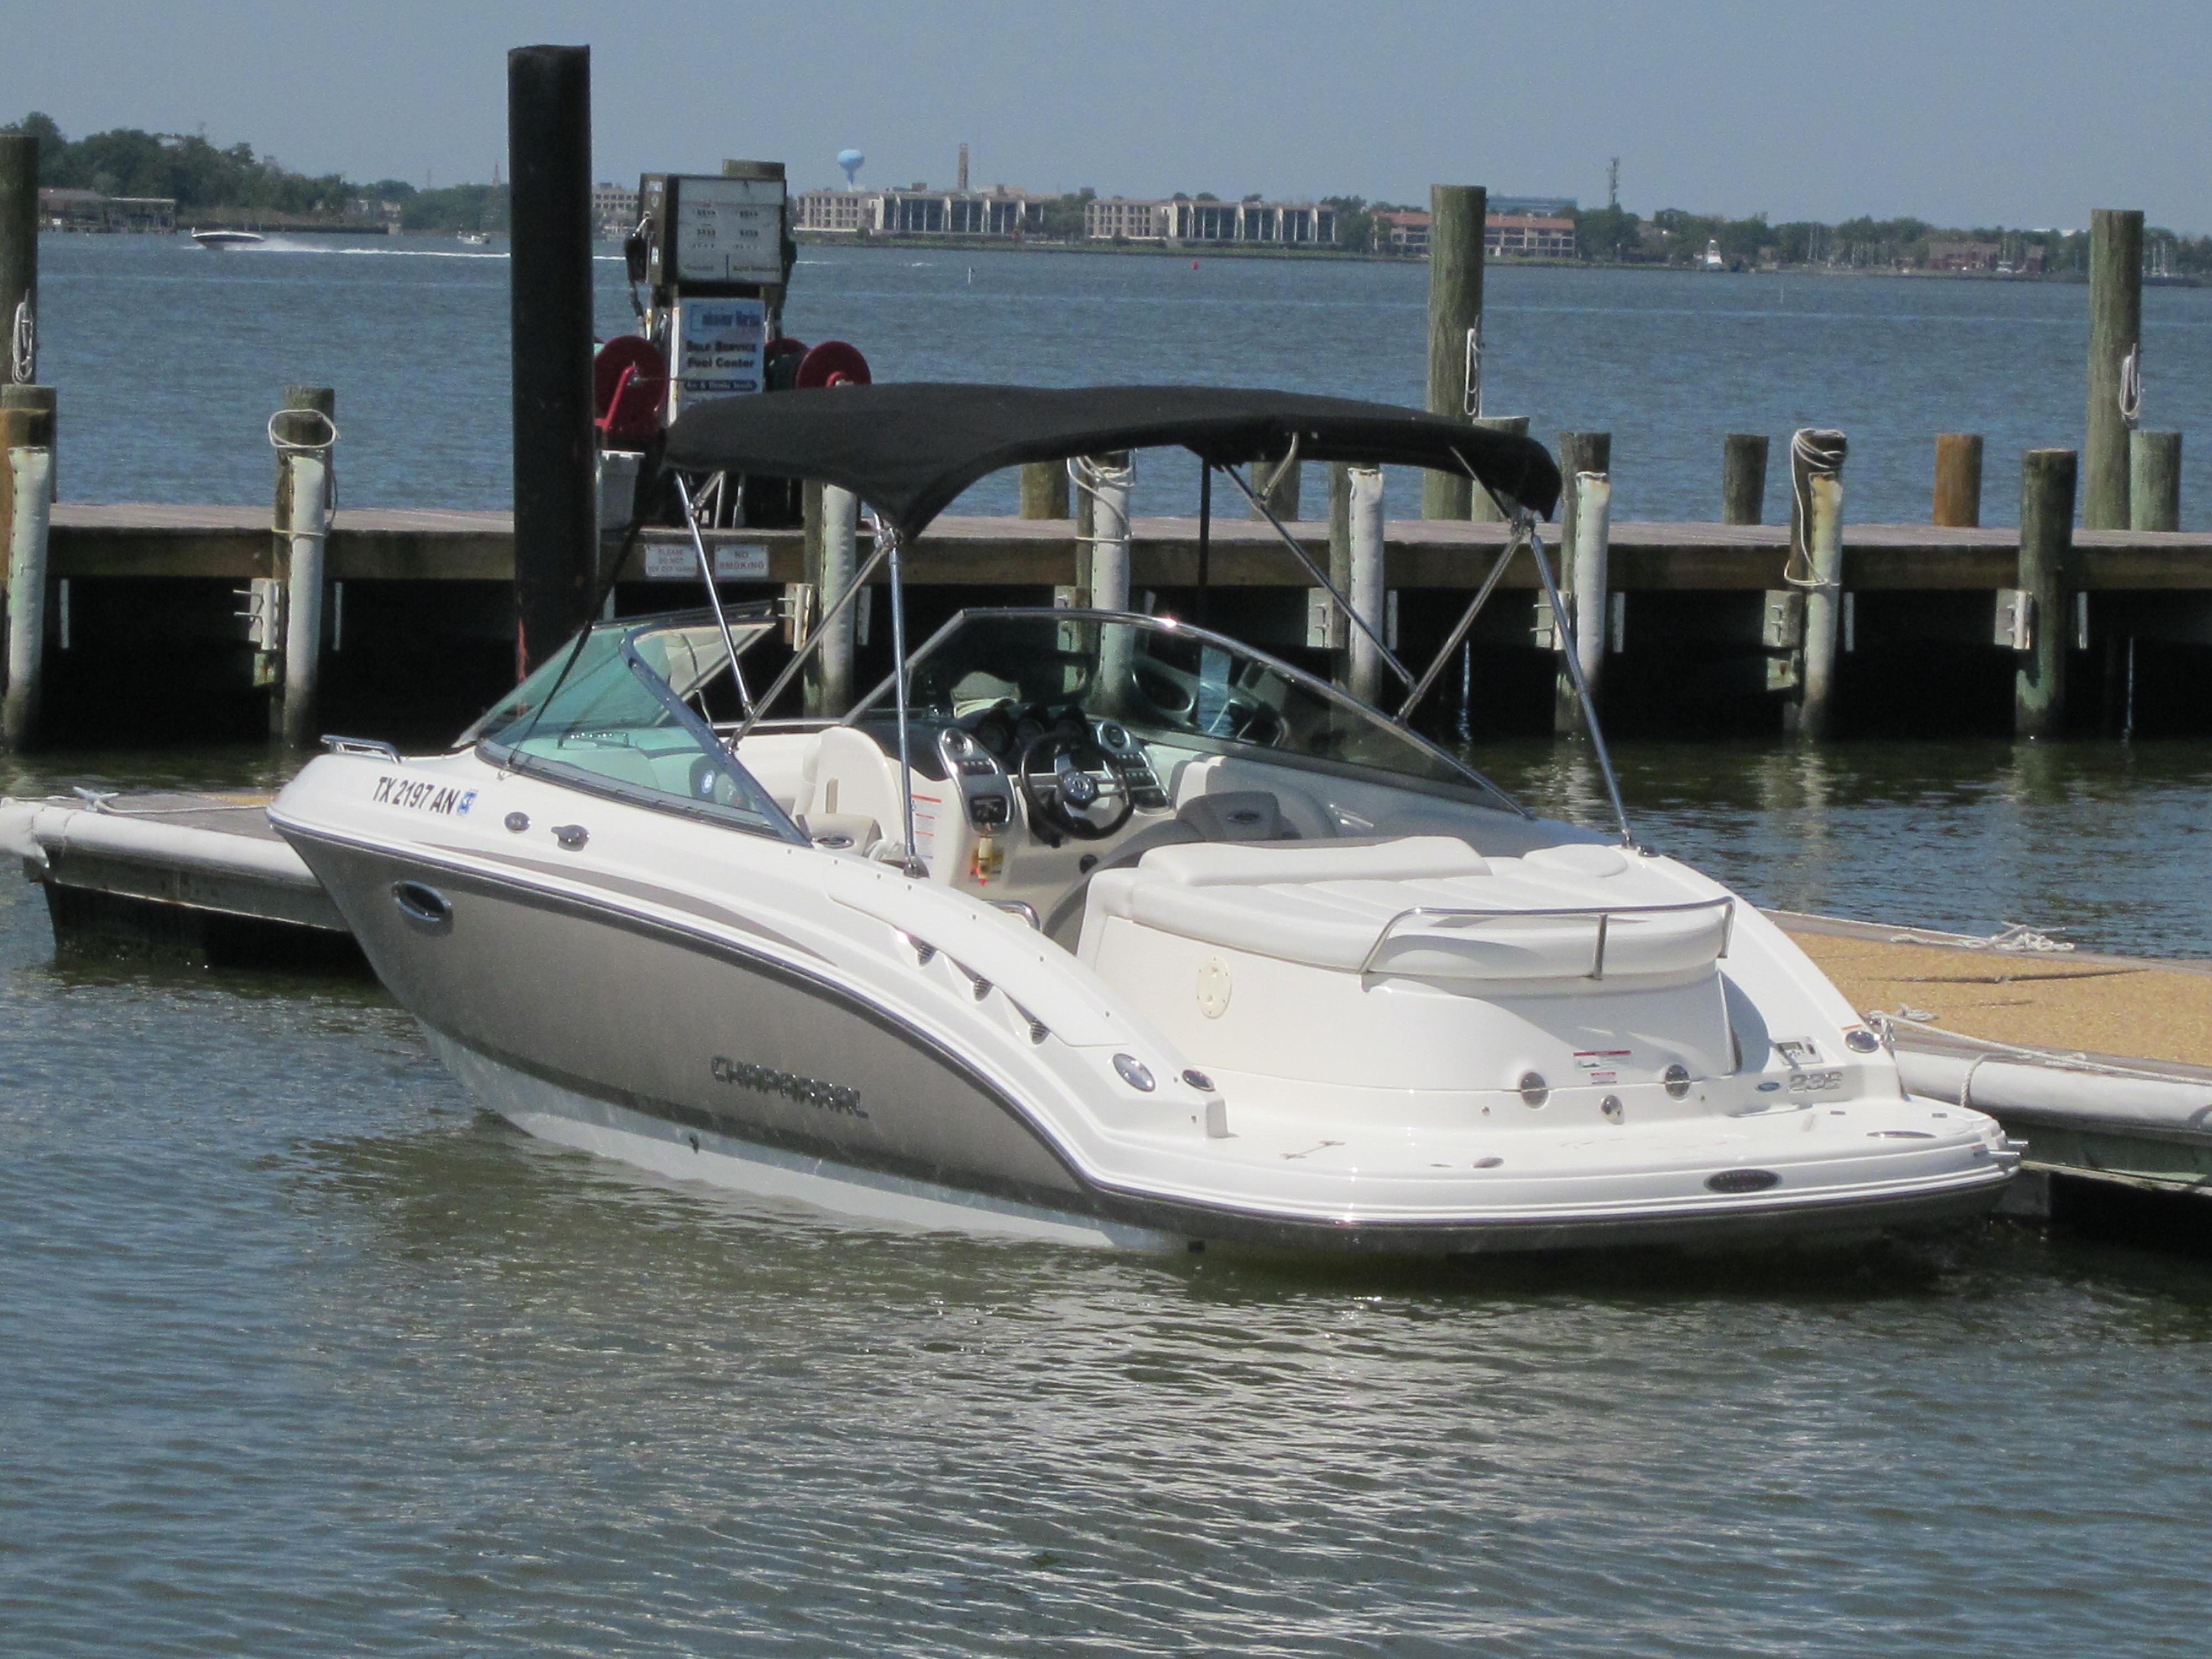 Chaparral 236 SSX, Seabrook